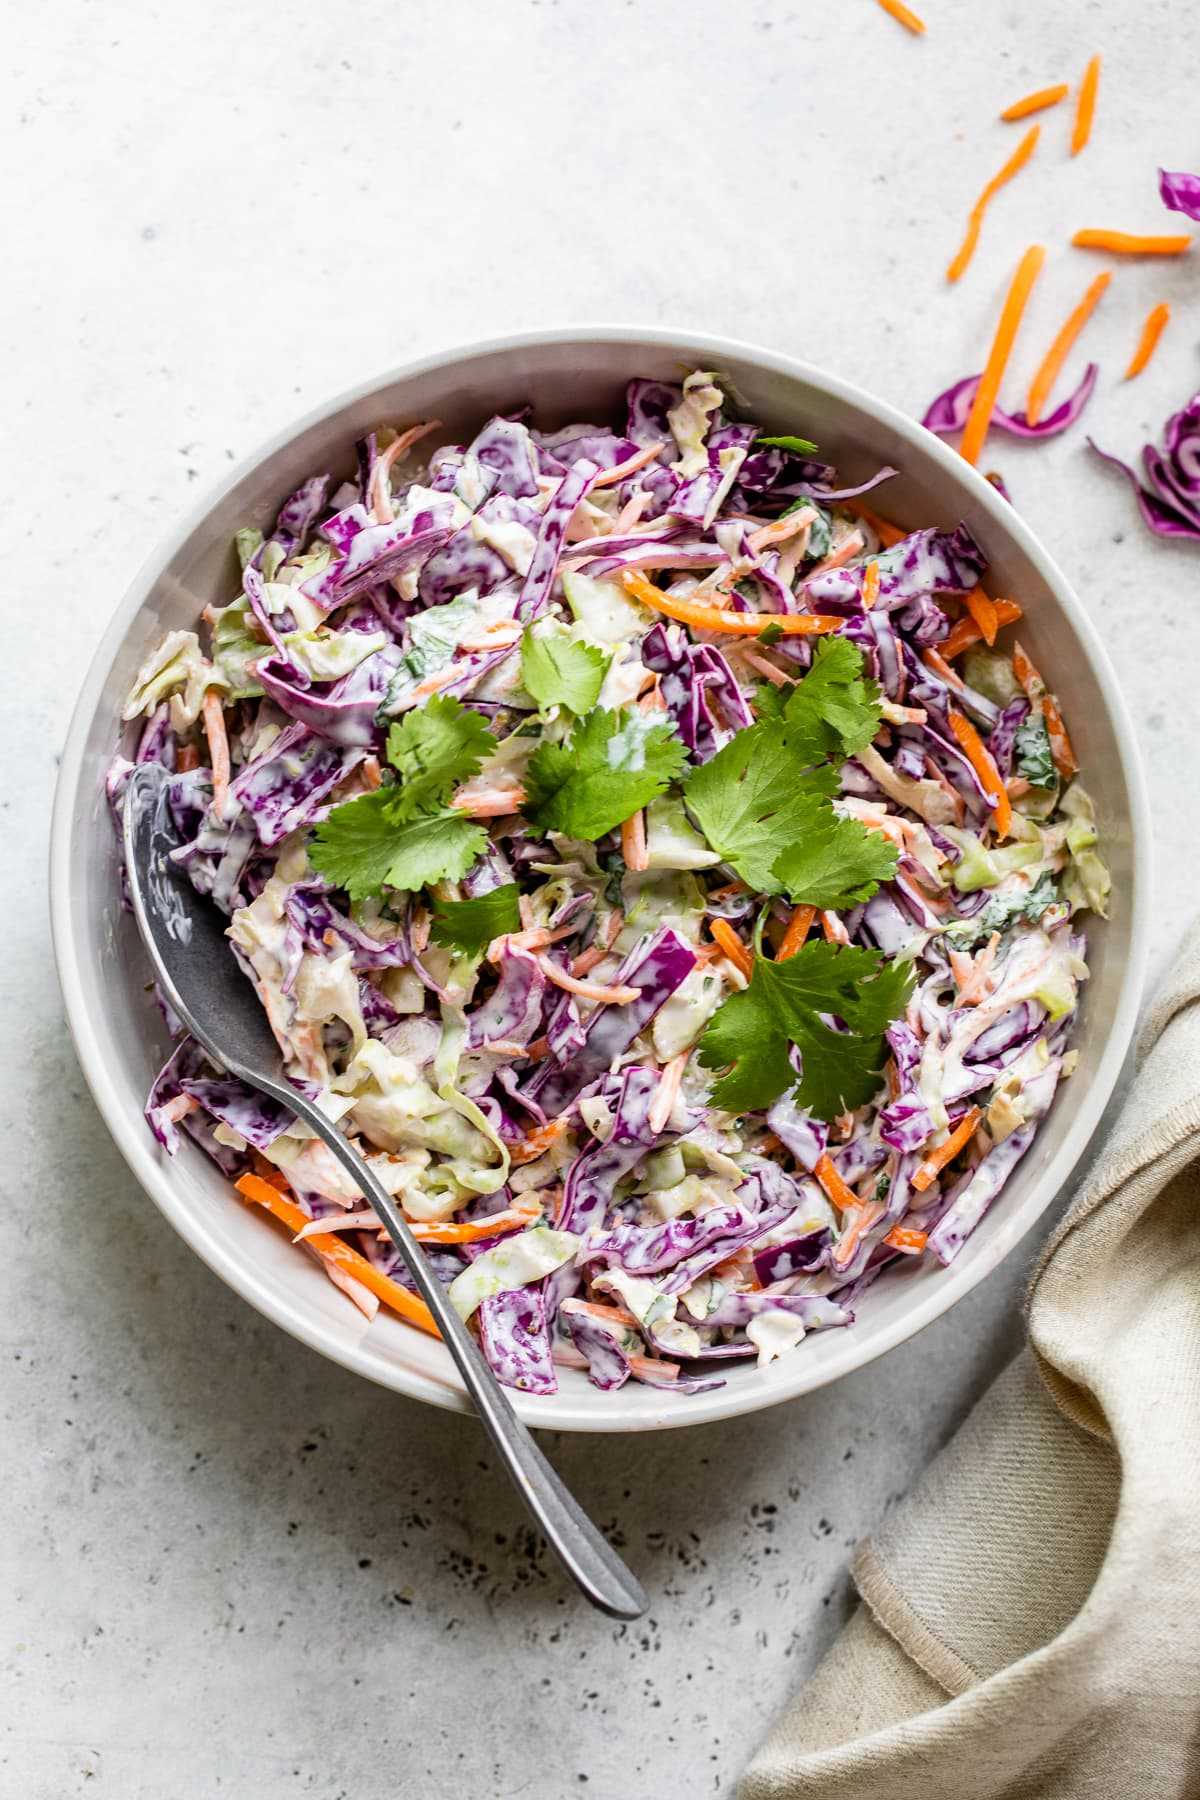 Fish taco slaw in a bowl topped with cilantro leaves.